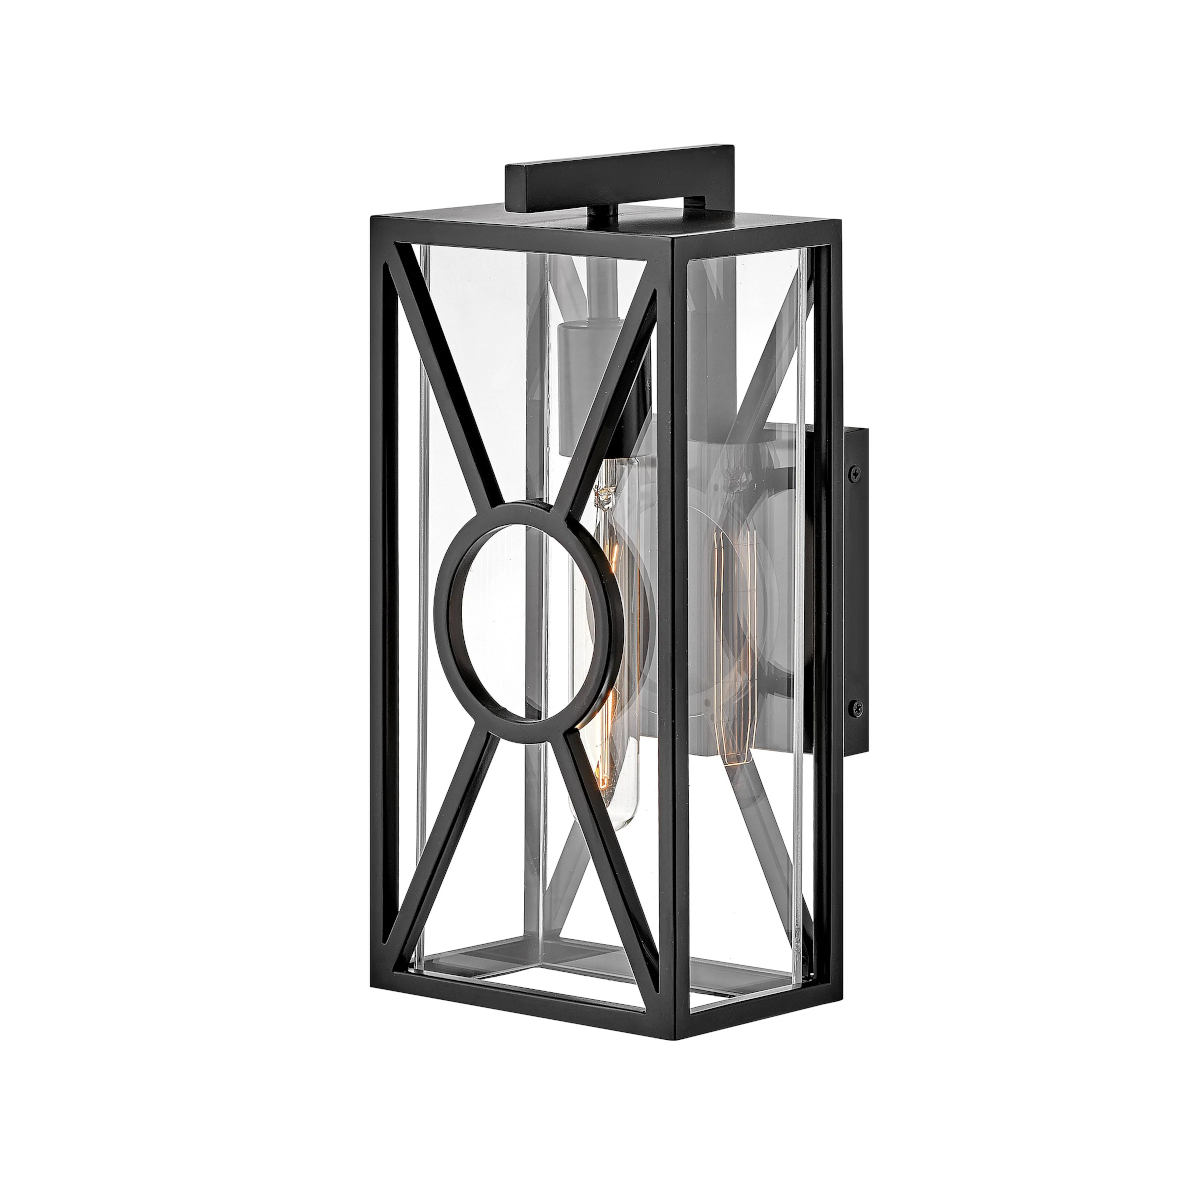 18370Bk Brixton Outdoor wall lantern Black with clear Glass